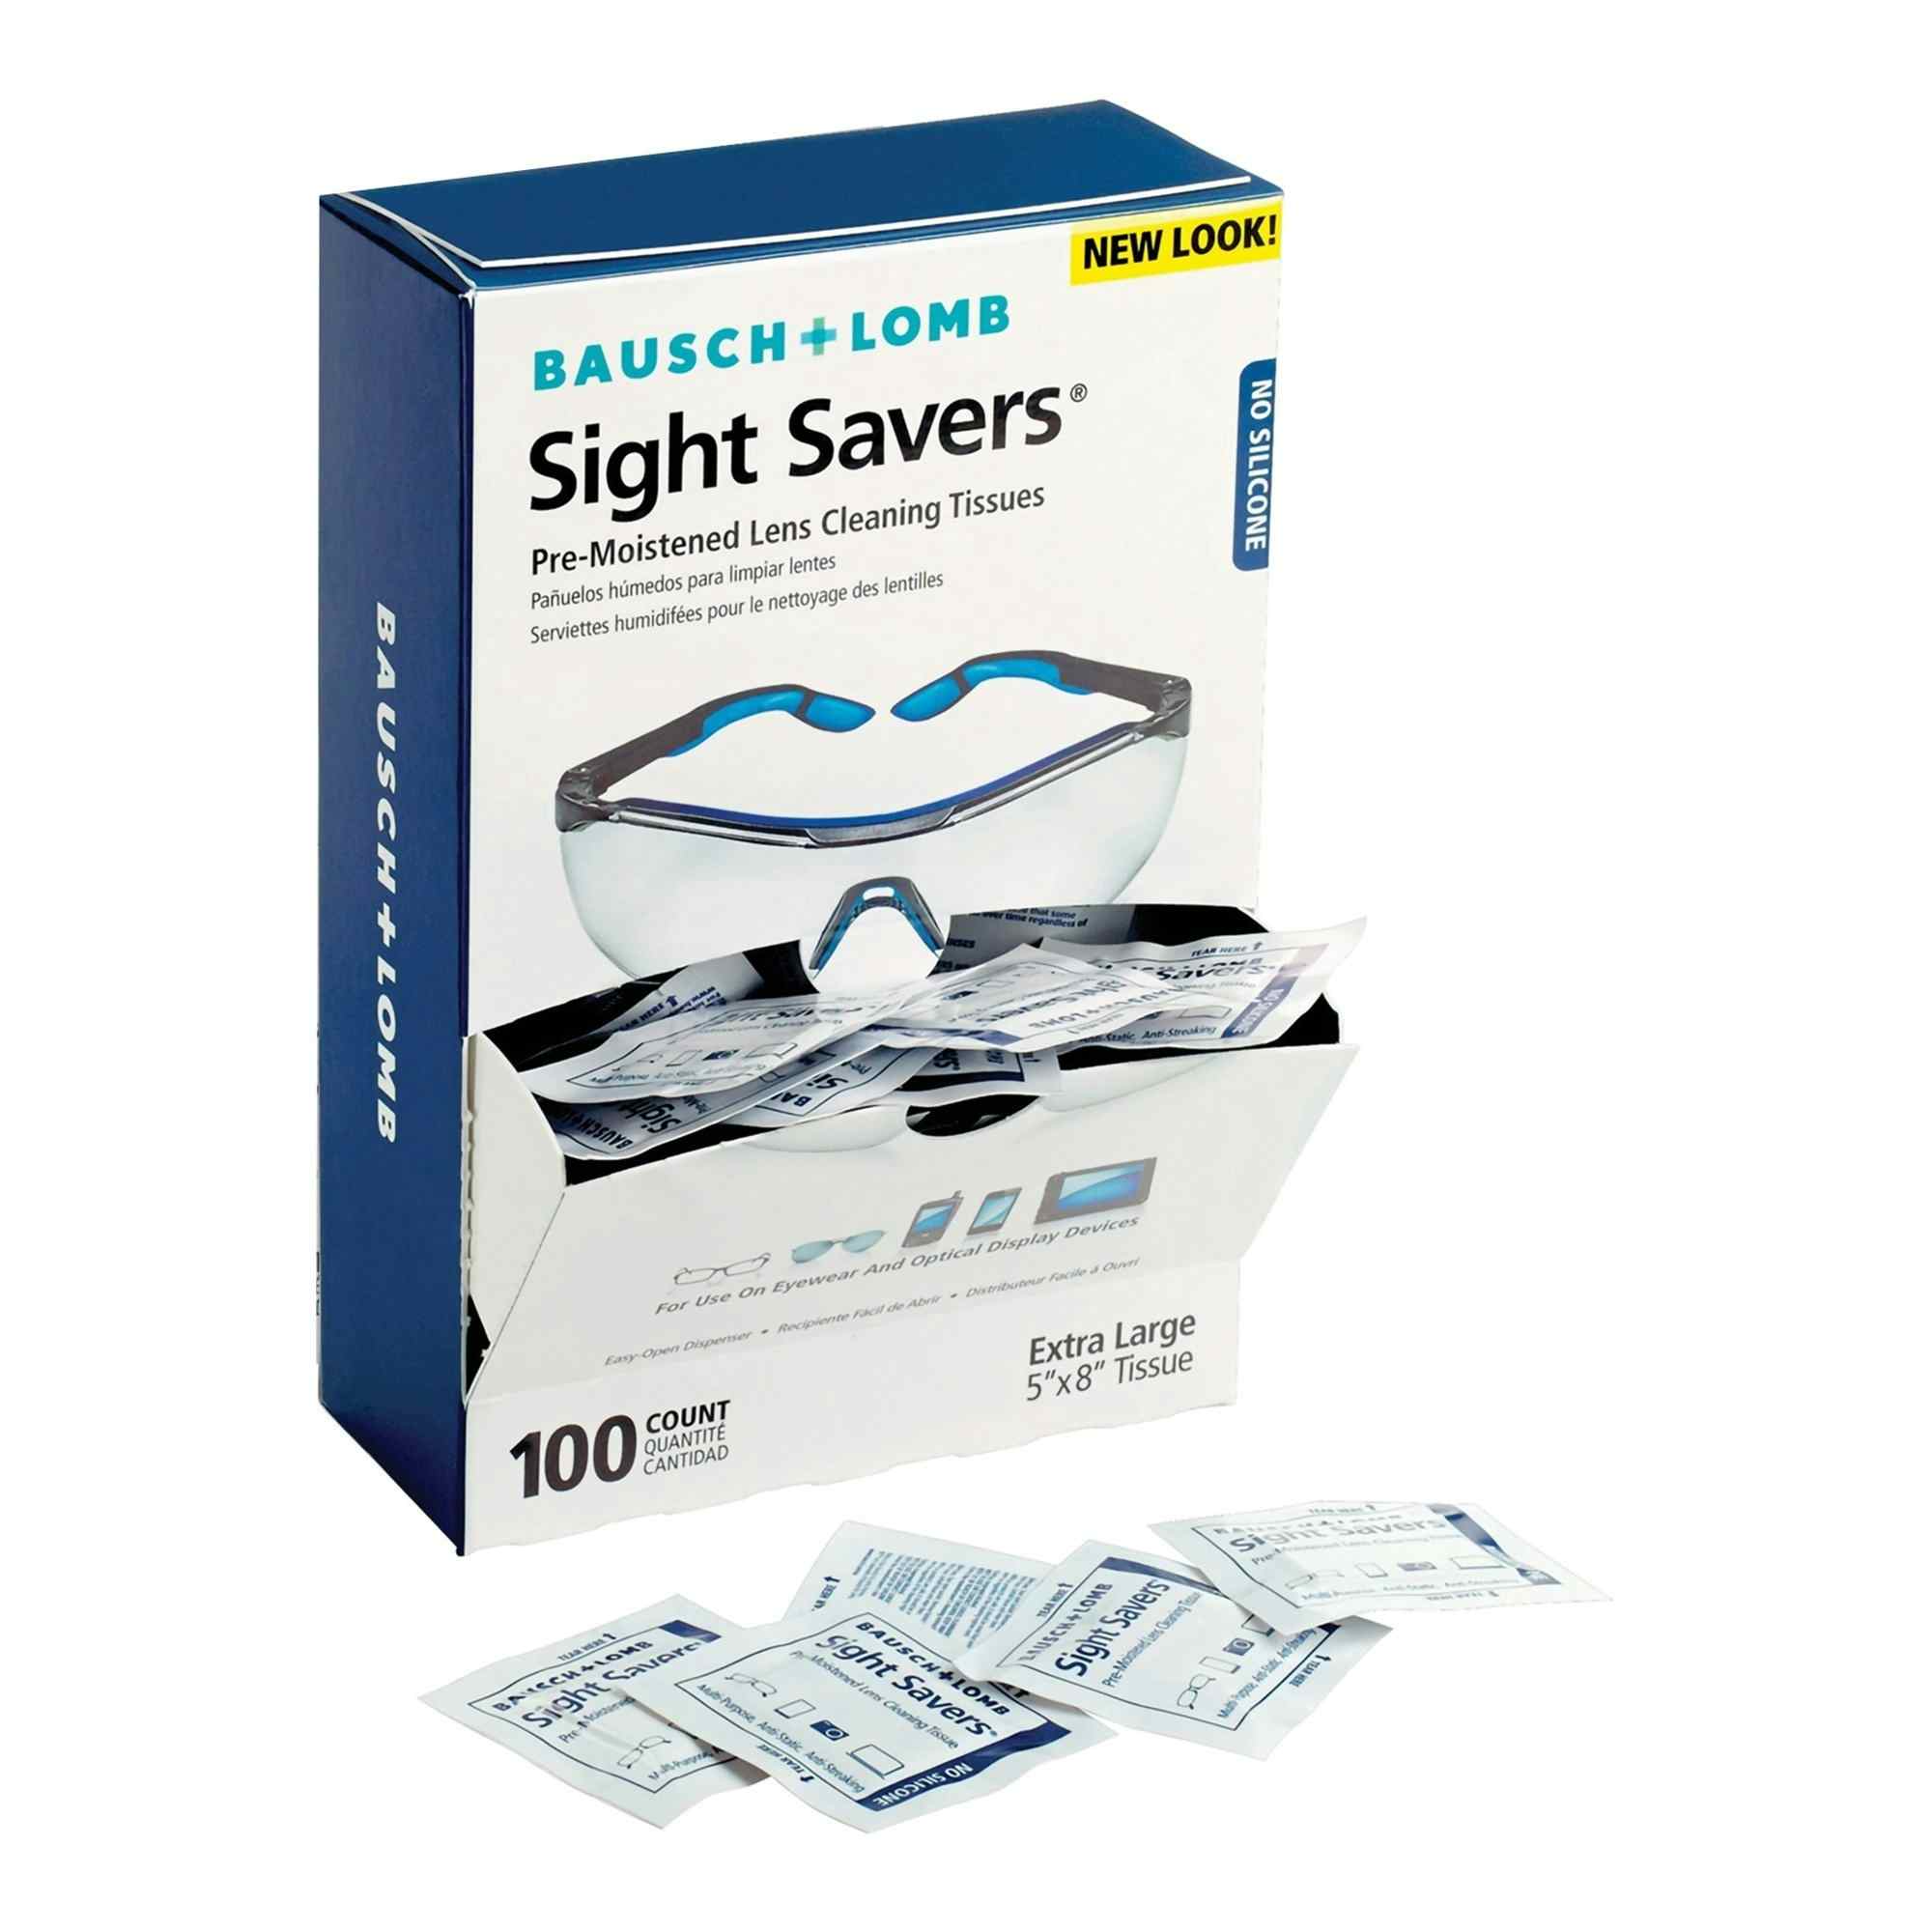 Sight Savers Pre-Moistened Lens Cleaning Tissues, 8574GM, Box of 100